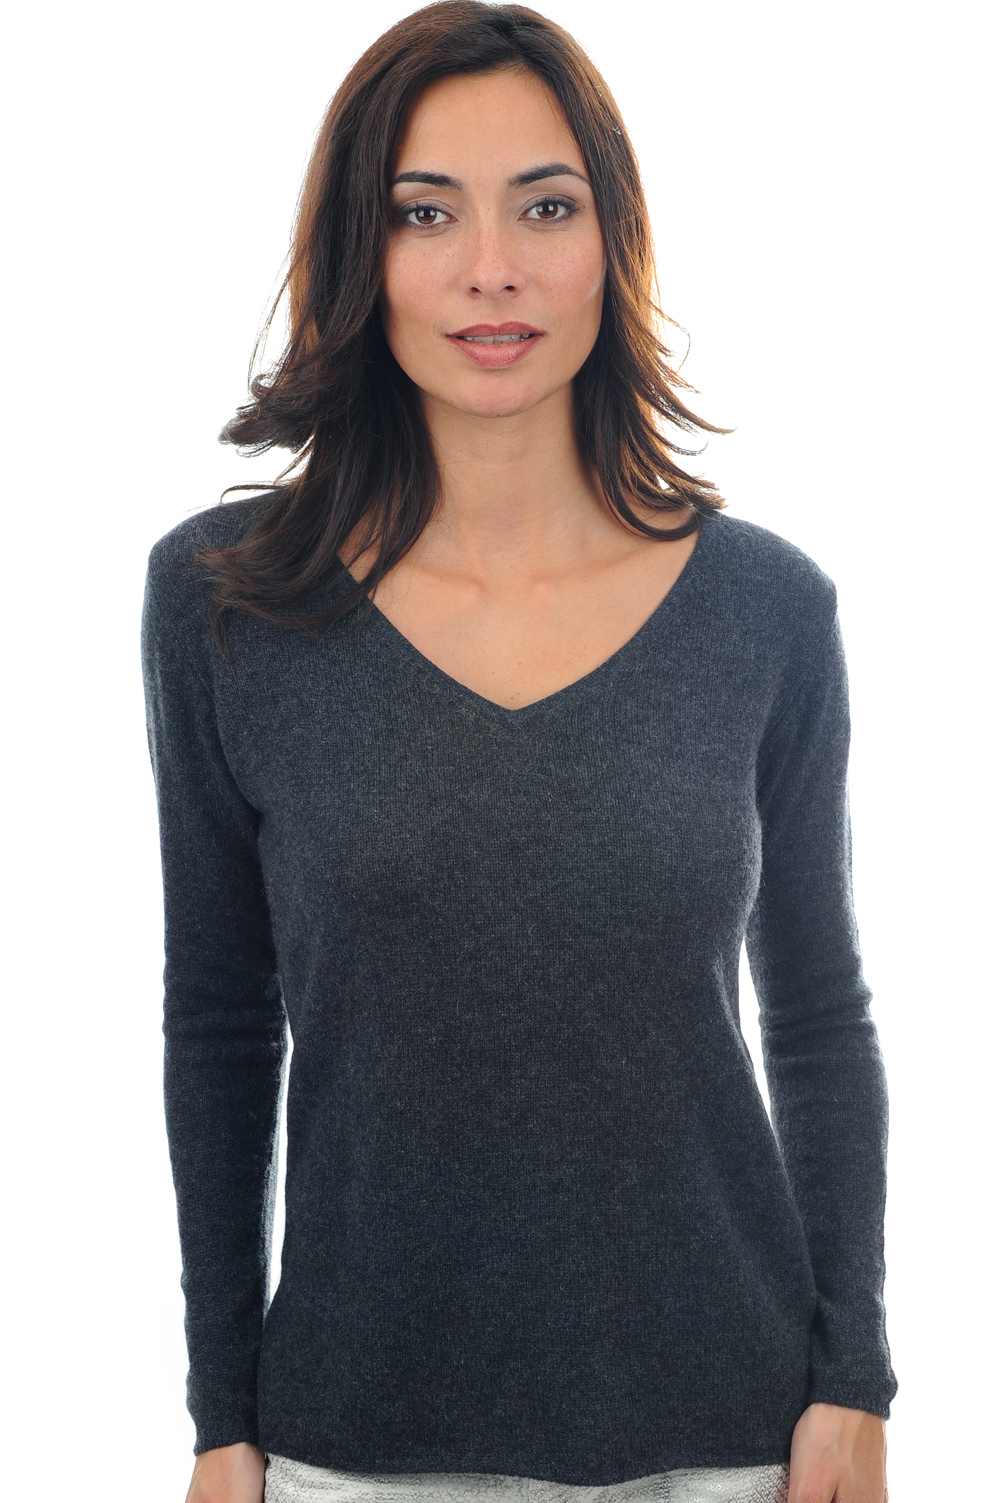 Cashmere ladies basic sweaters at low prices flavie charcoal marl m